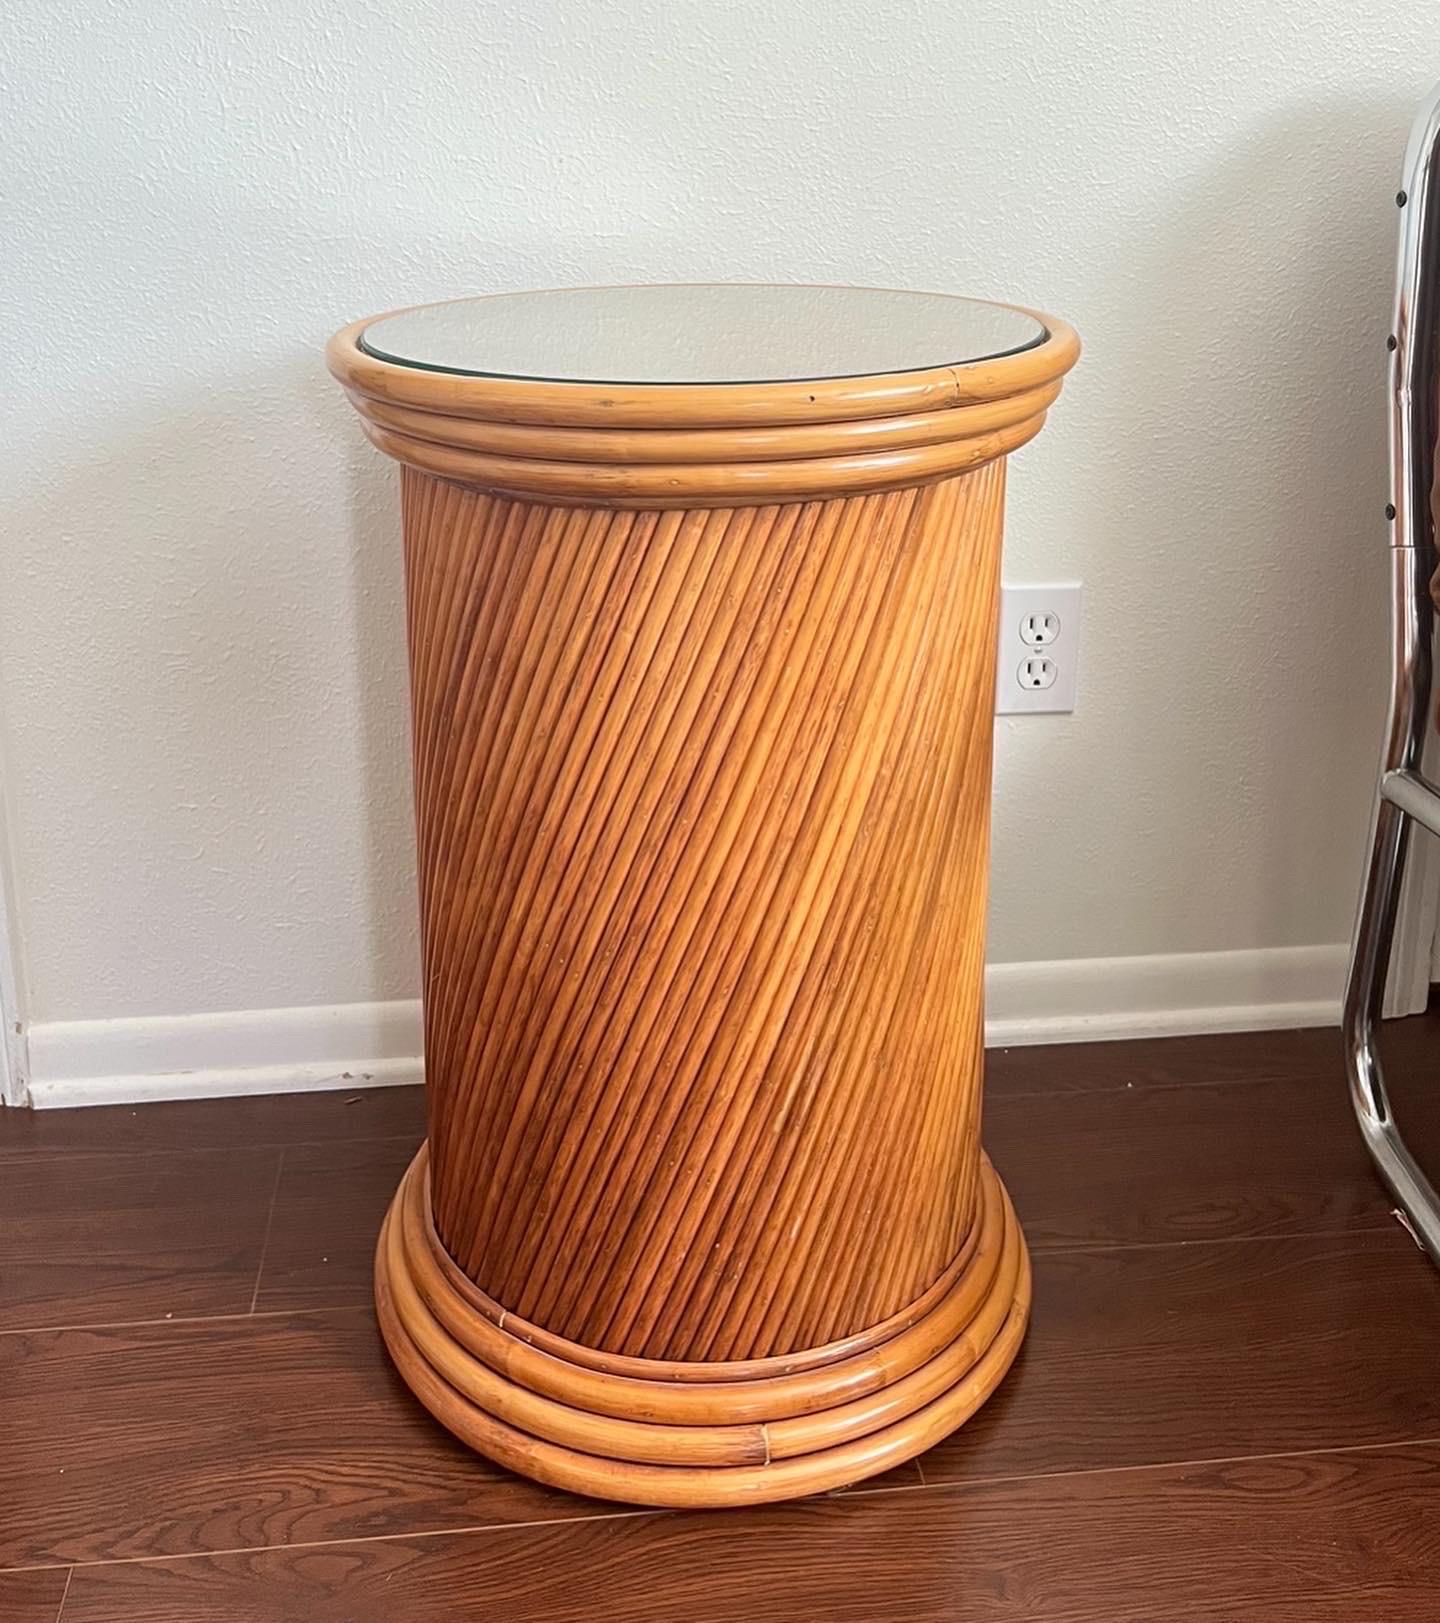 Split reed bamboo pedestal table in the manner of Gabriella Crespi. Overall, excellent vintage condition.

Dimensions:
17.5